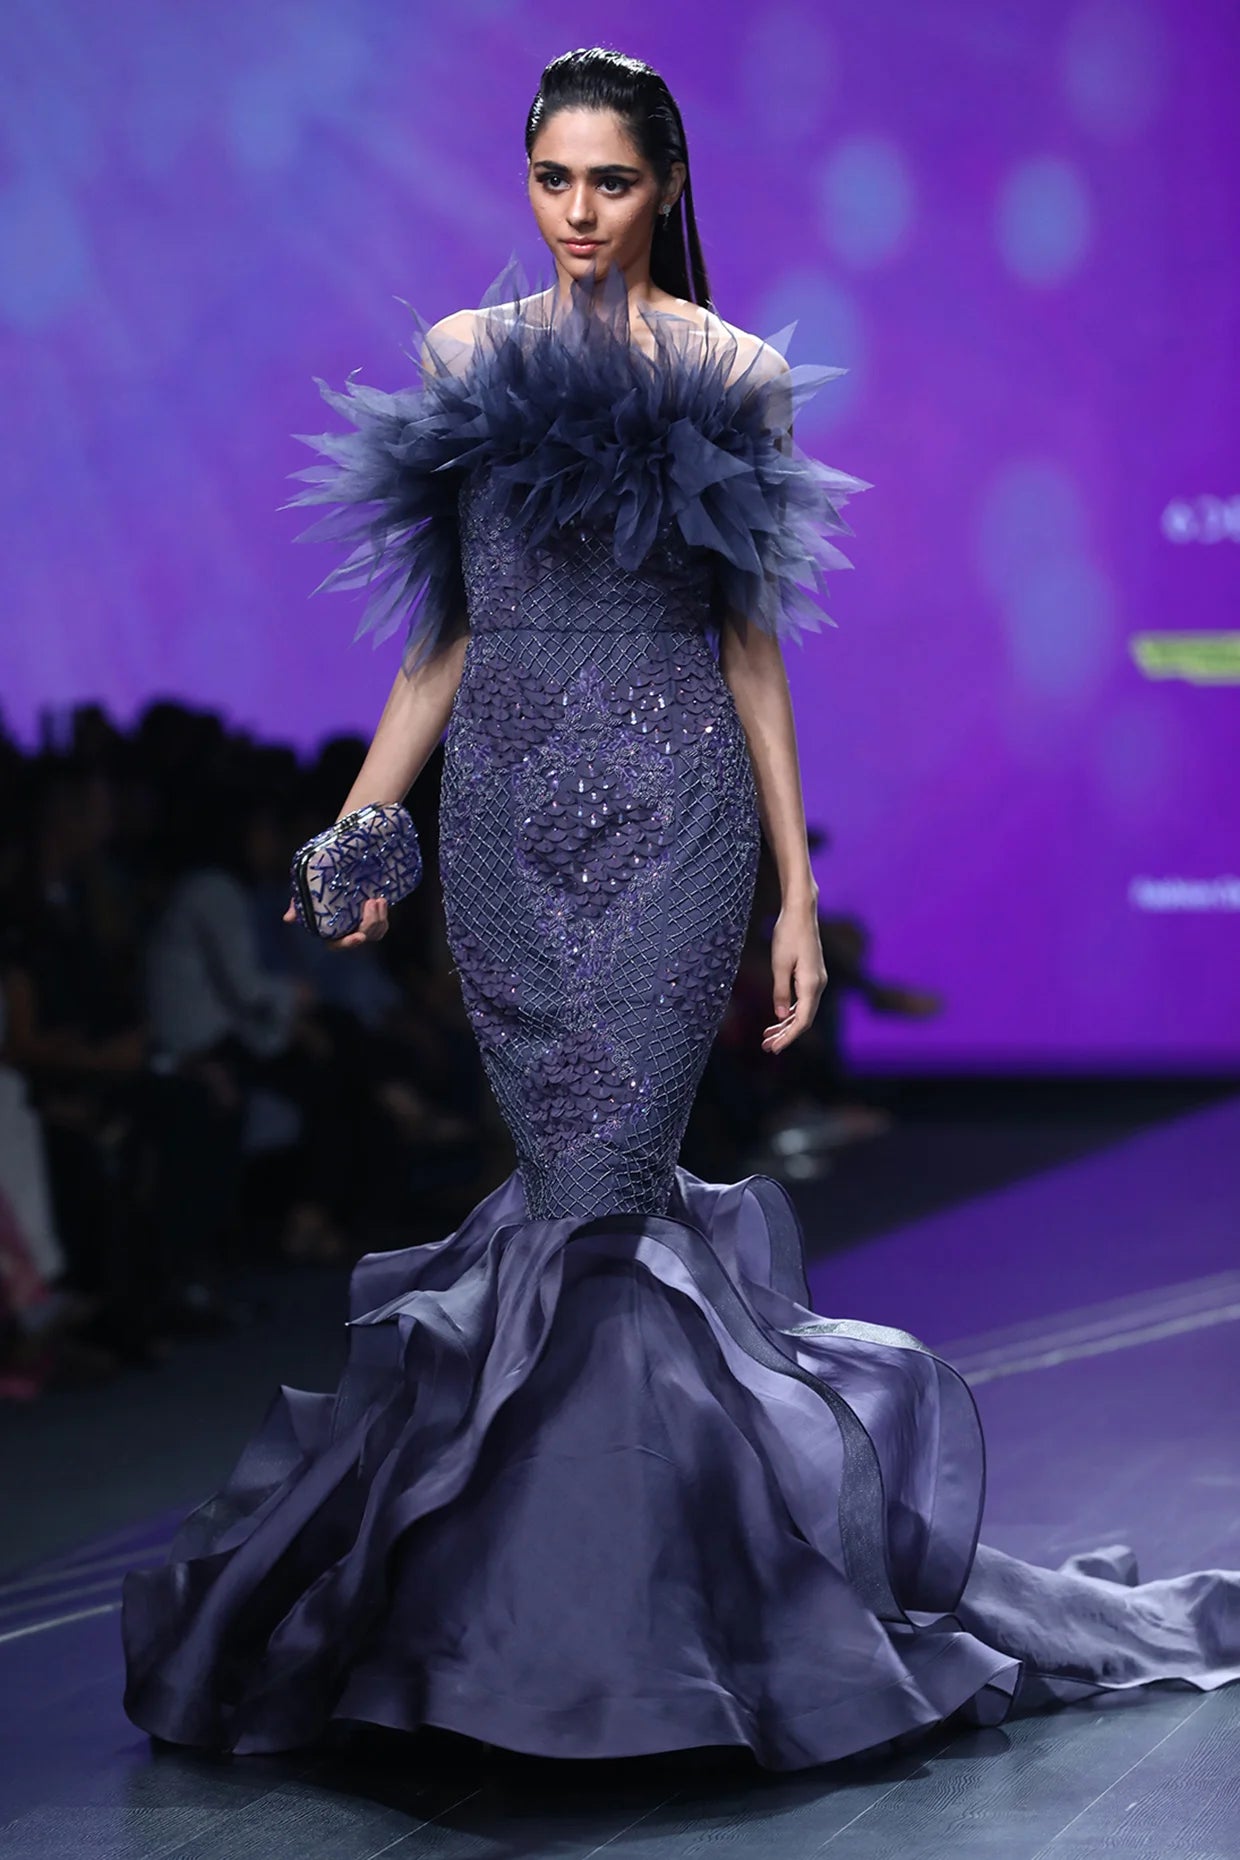 Tanzanite Crystal Ruffle Mermaid Gown With Applique 3 D Embroidery